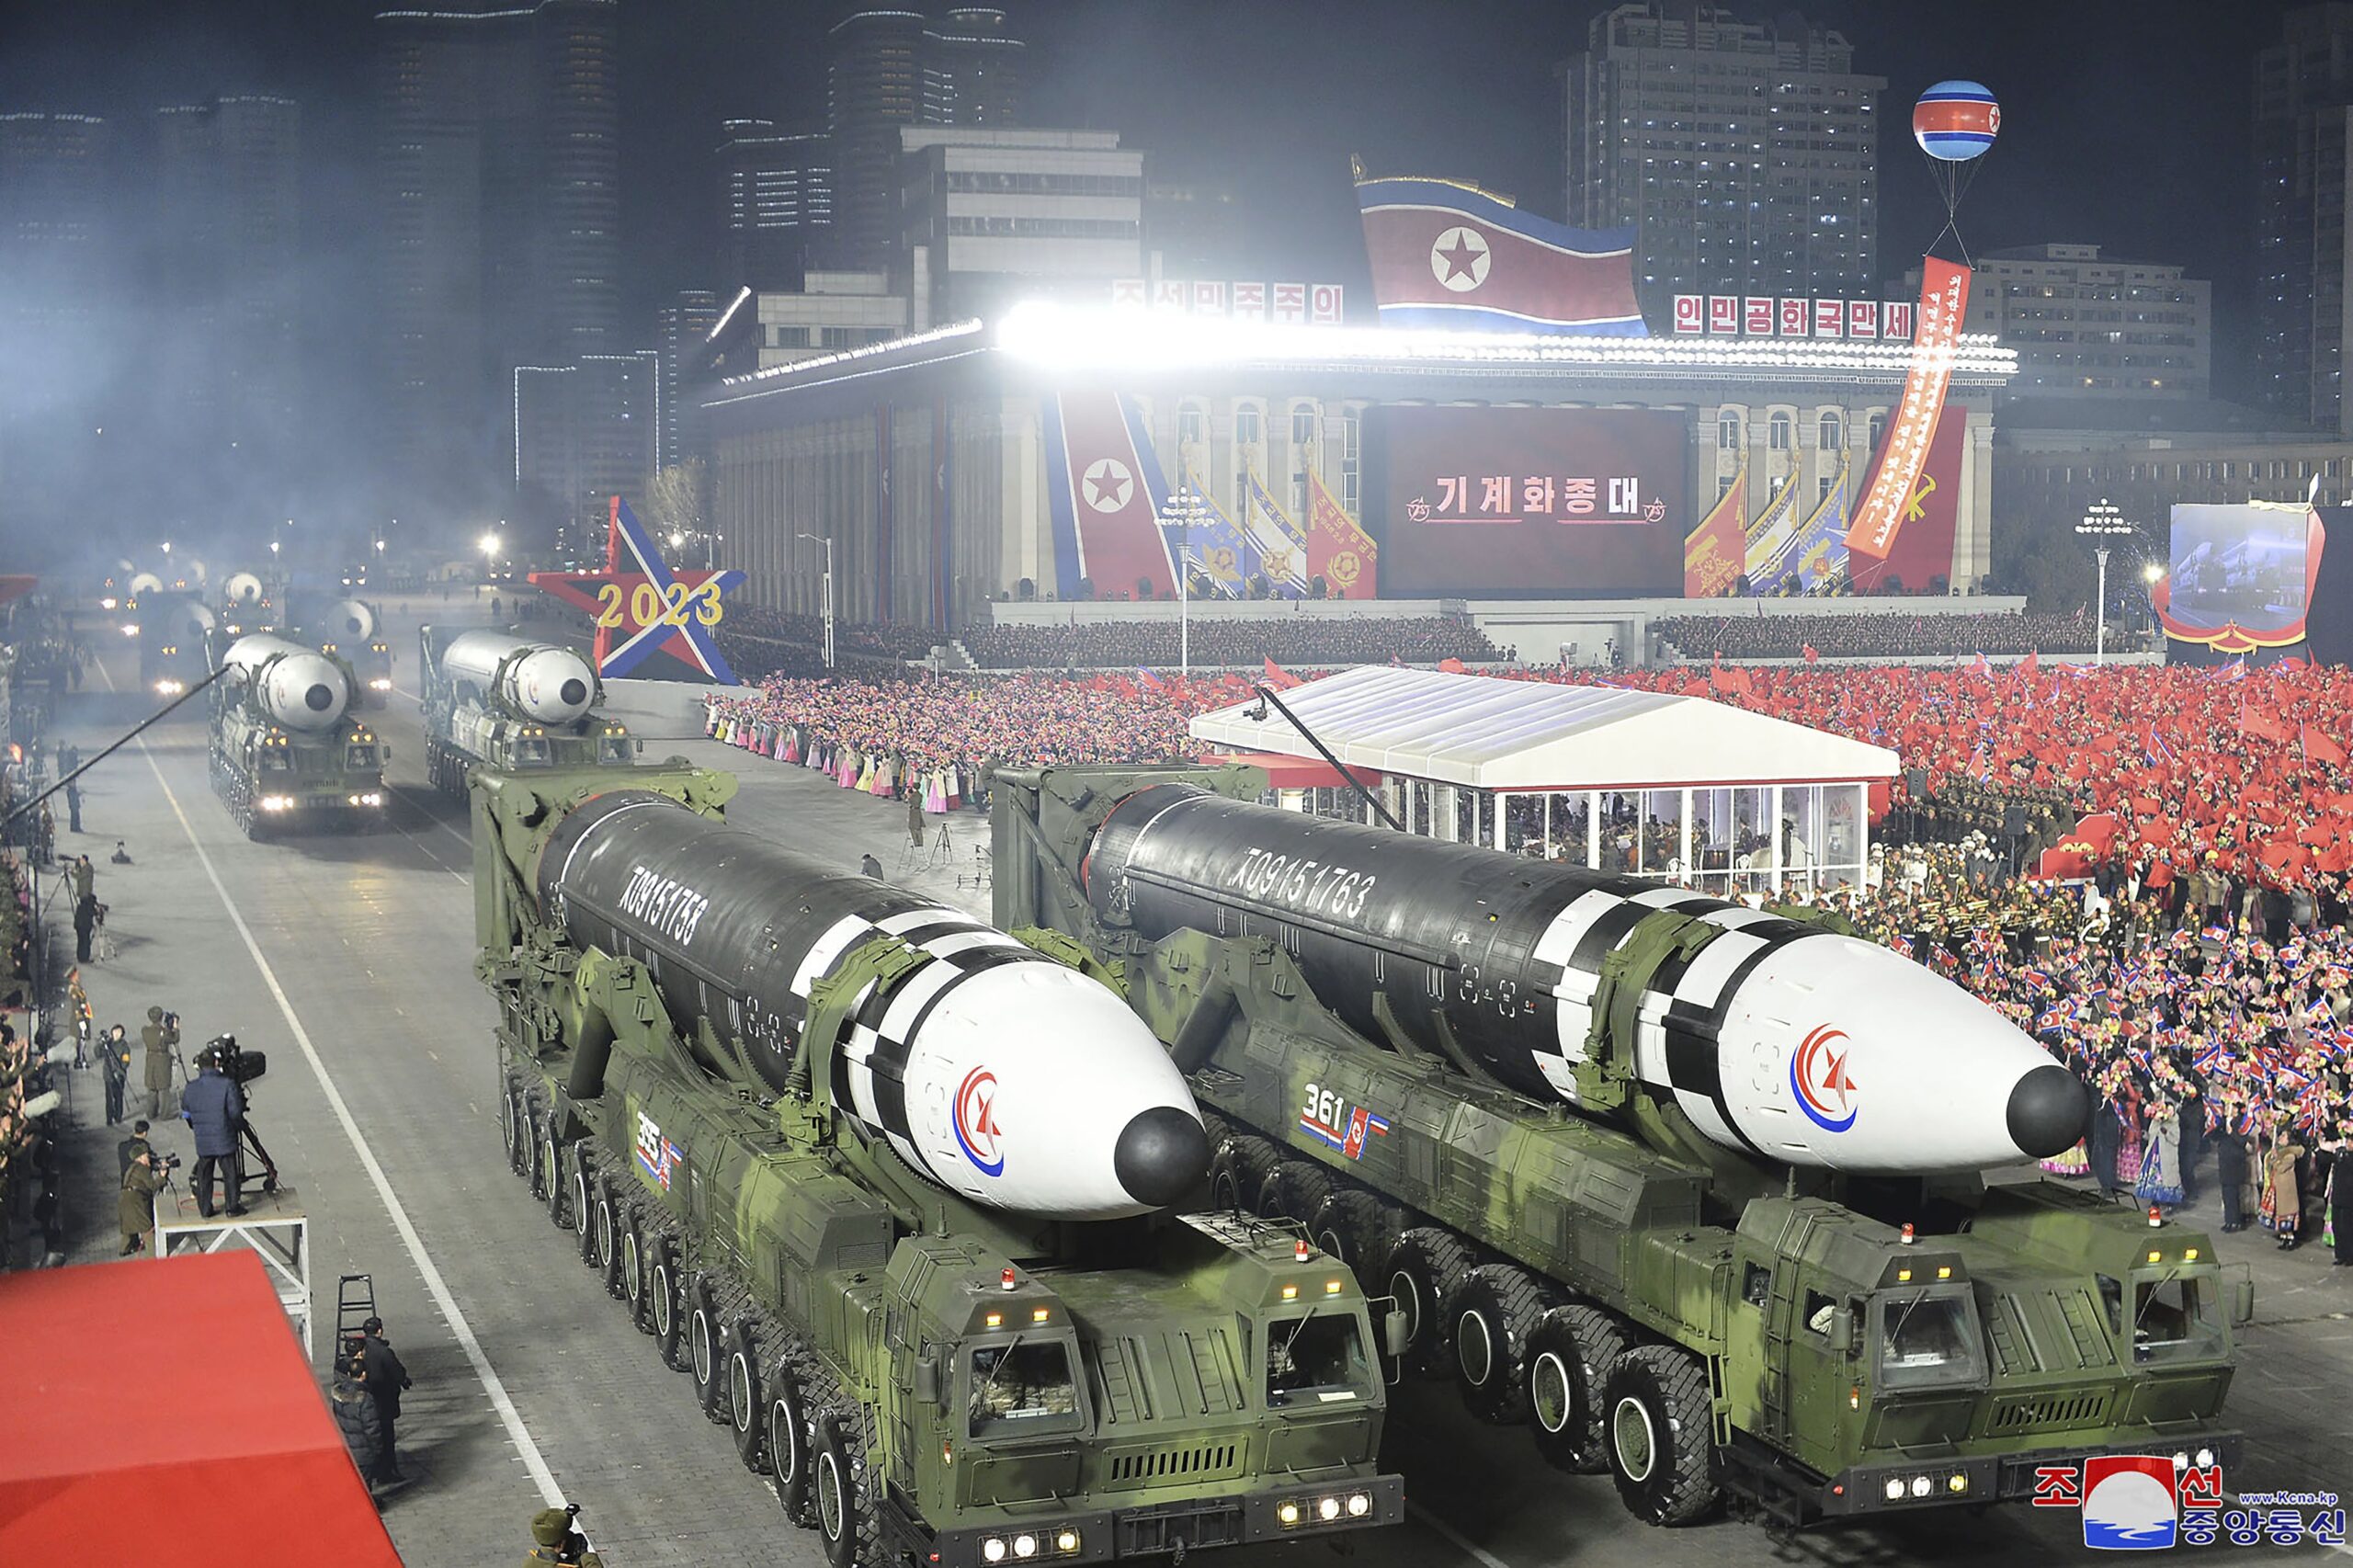 fears,-questions-about-north-korea’s-growing-nuclear-arsenal